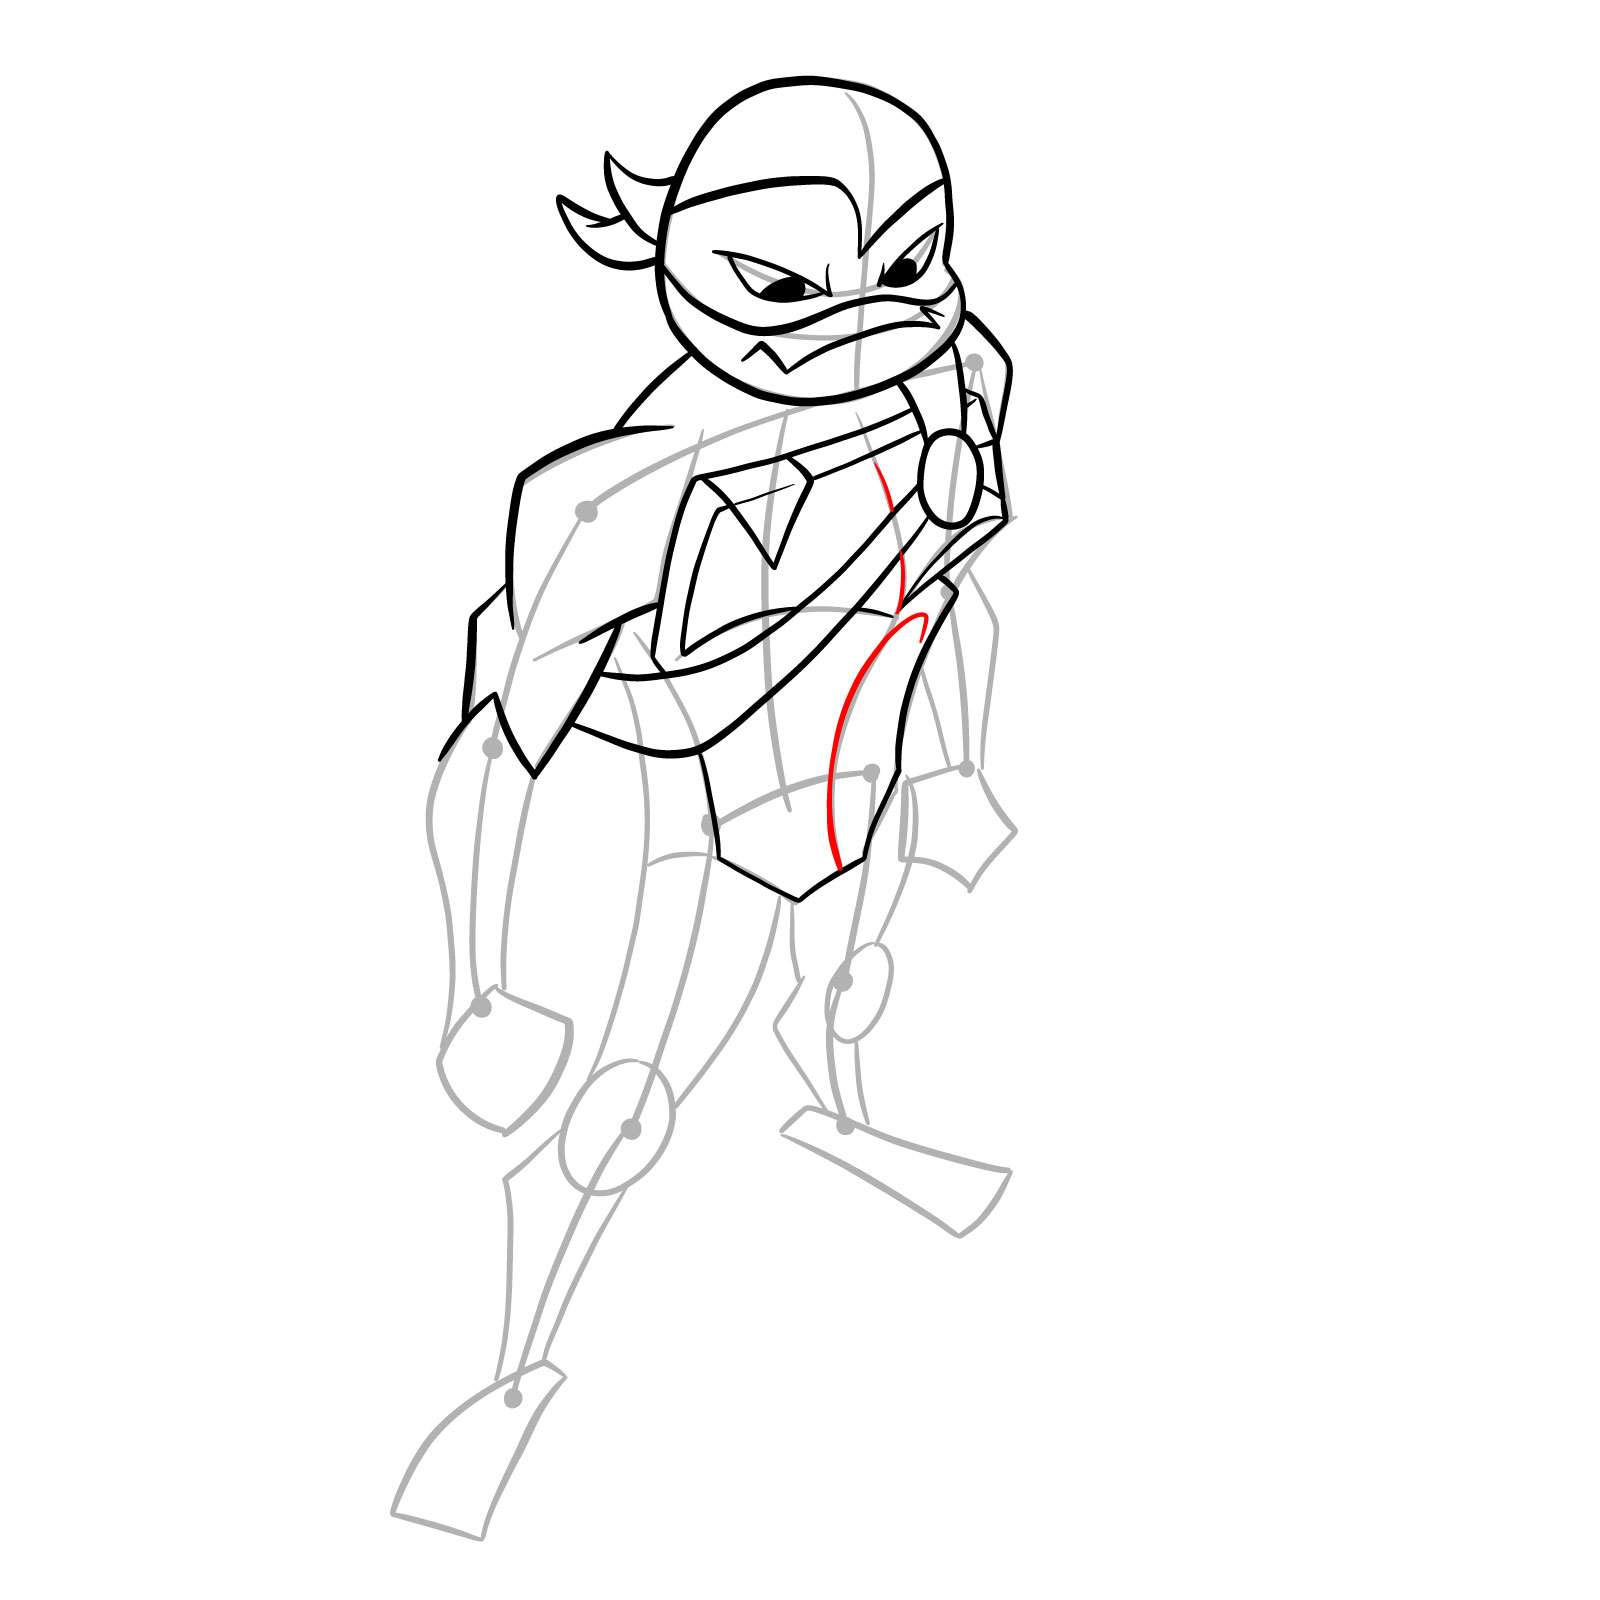 How to draw Mikey in Hamato Ninpō state - step 17